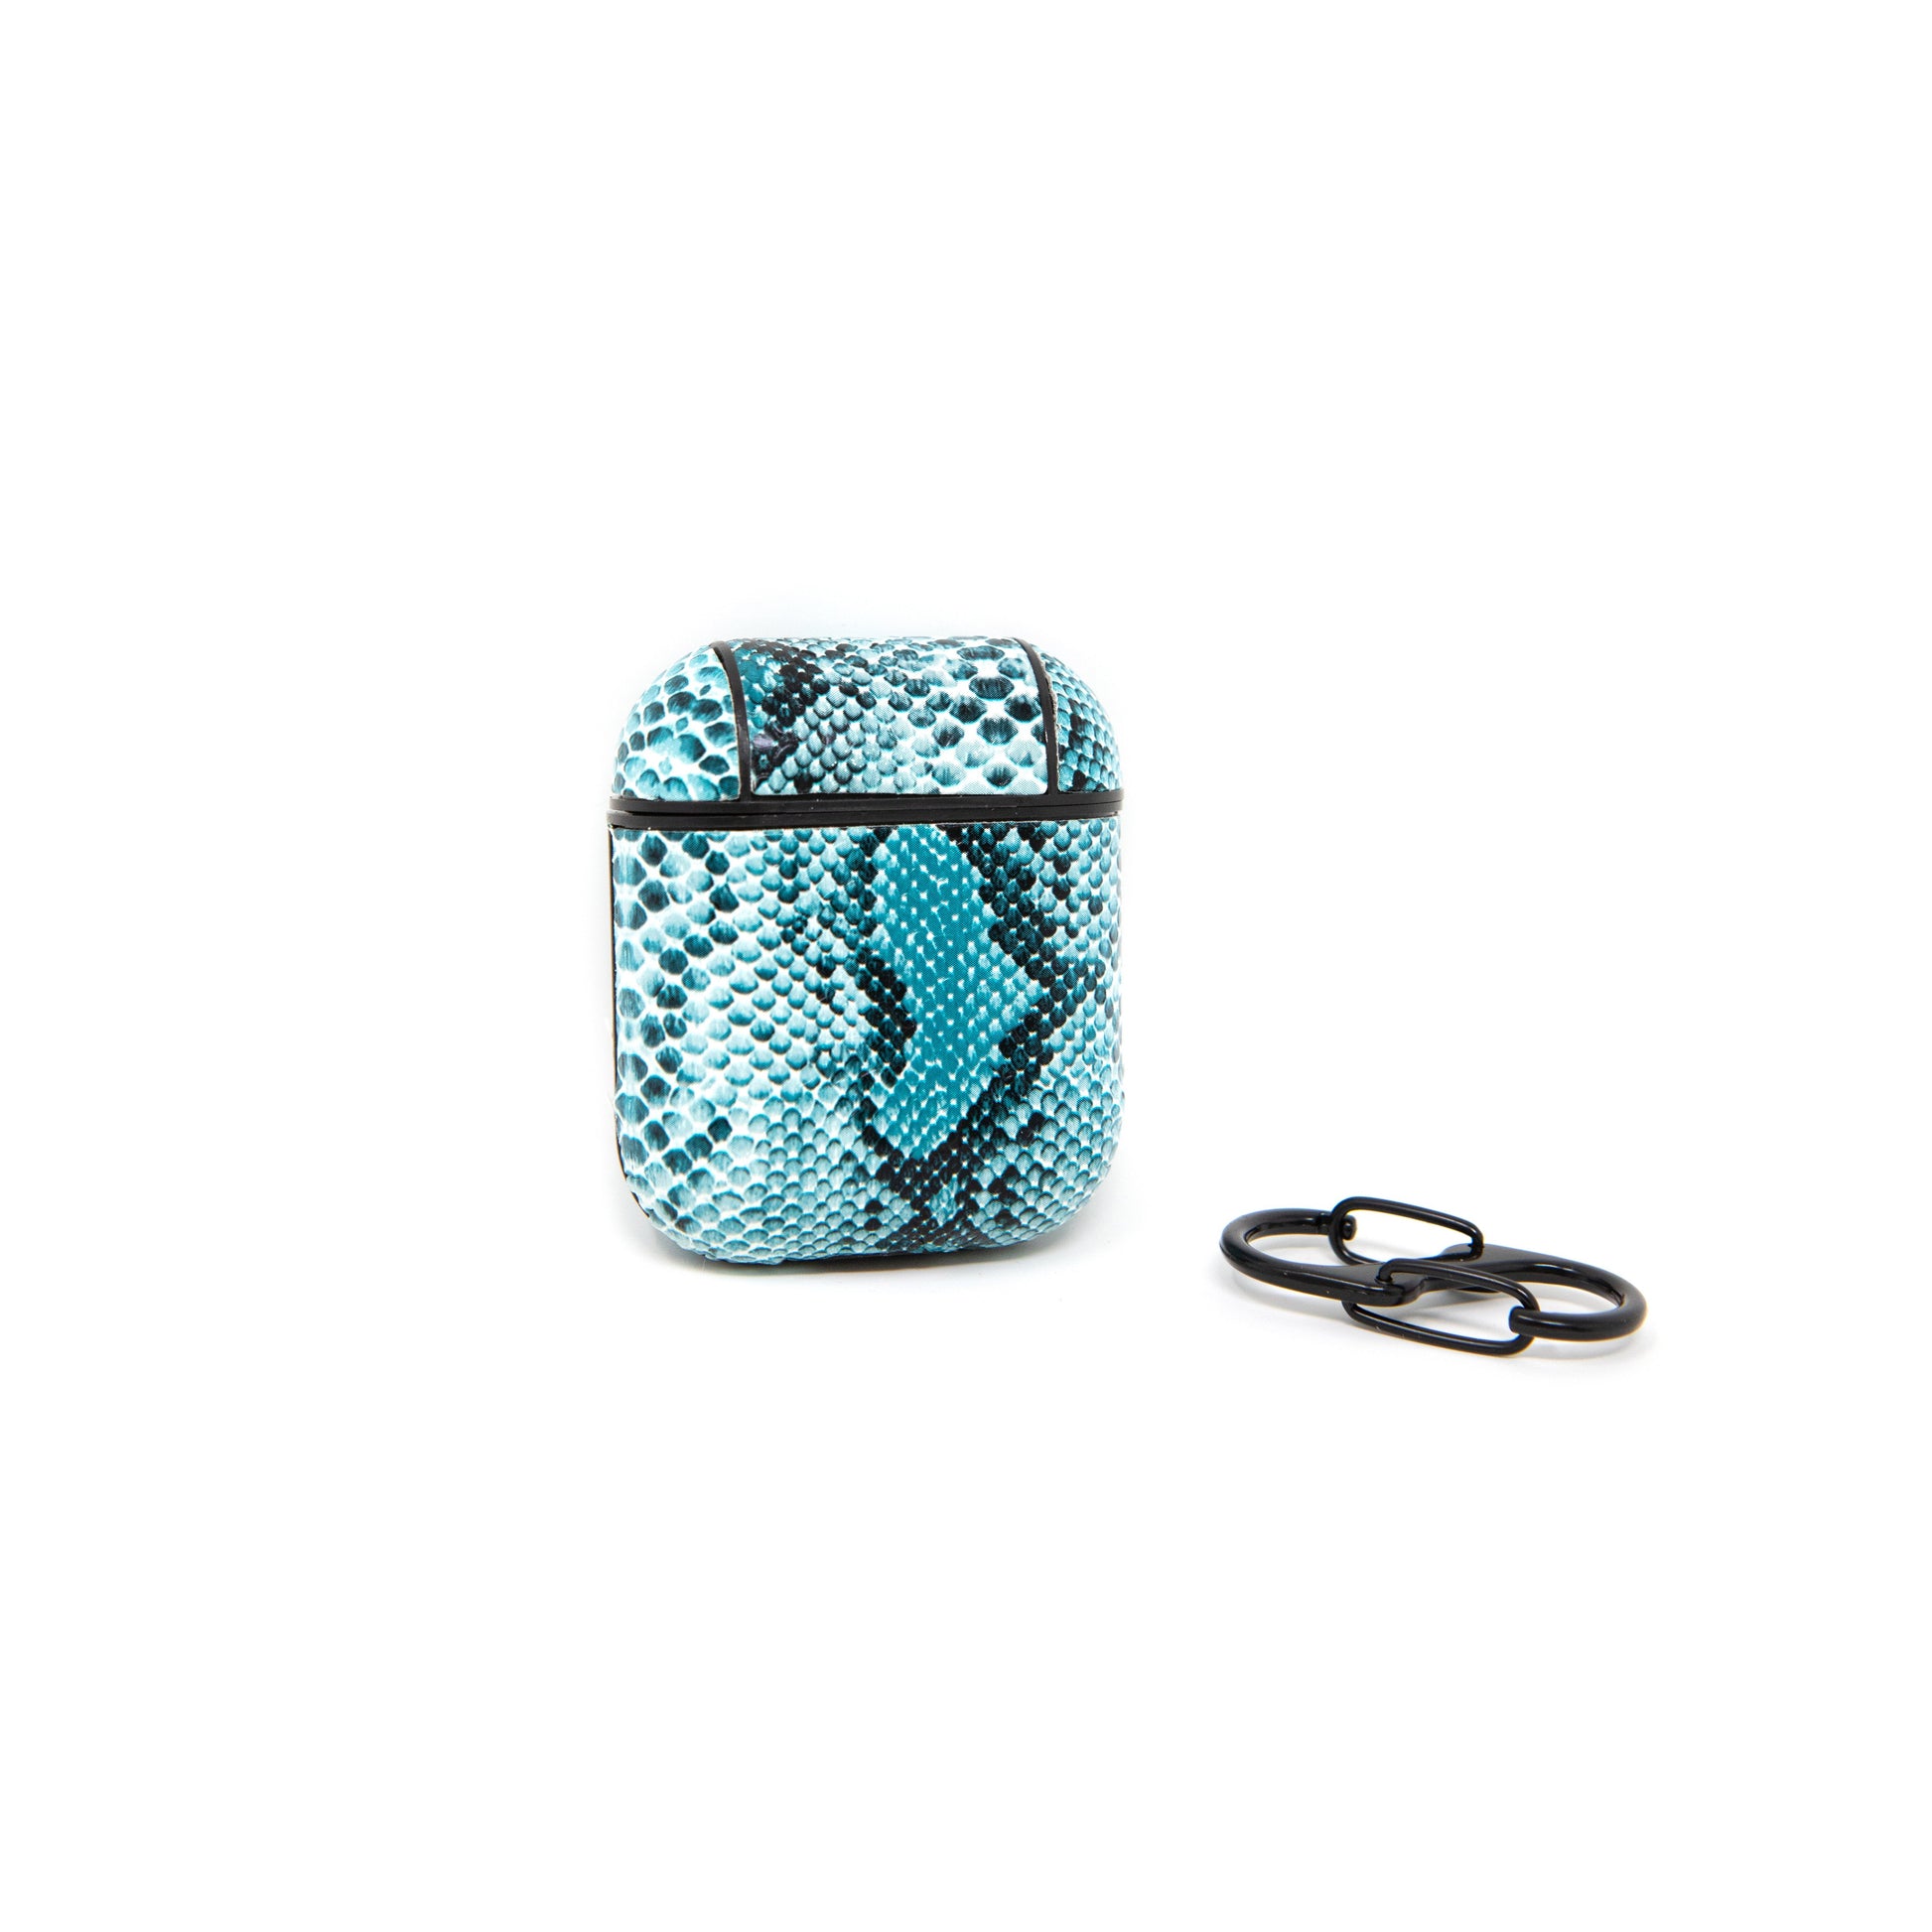 Snakeskin AirPod Cases ACCESSORY The Sis Kiss Blue